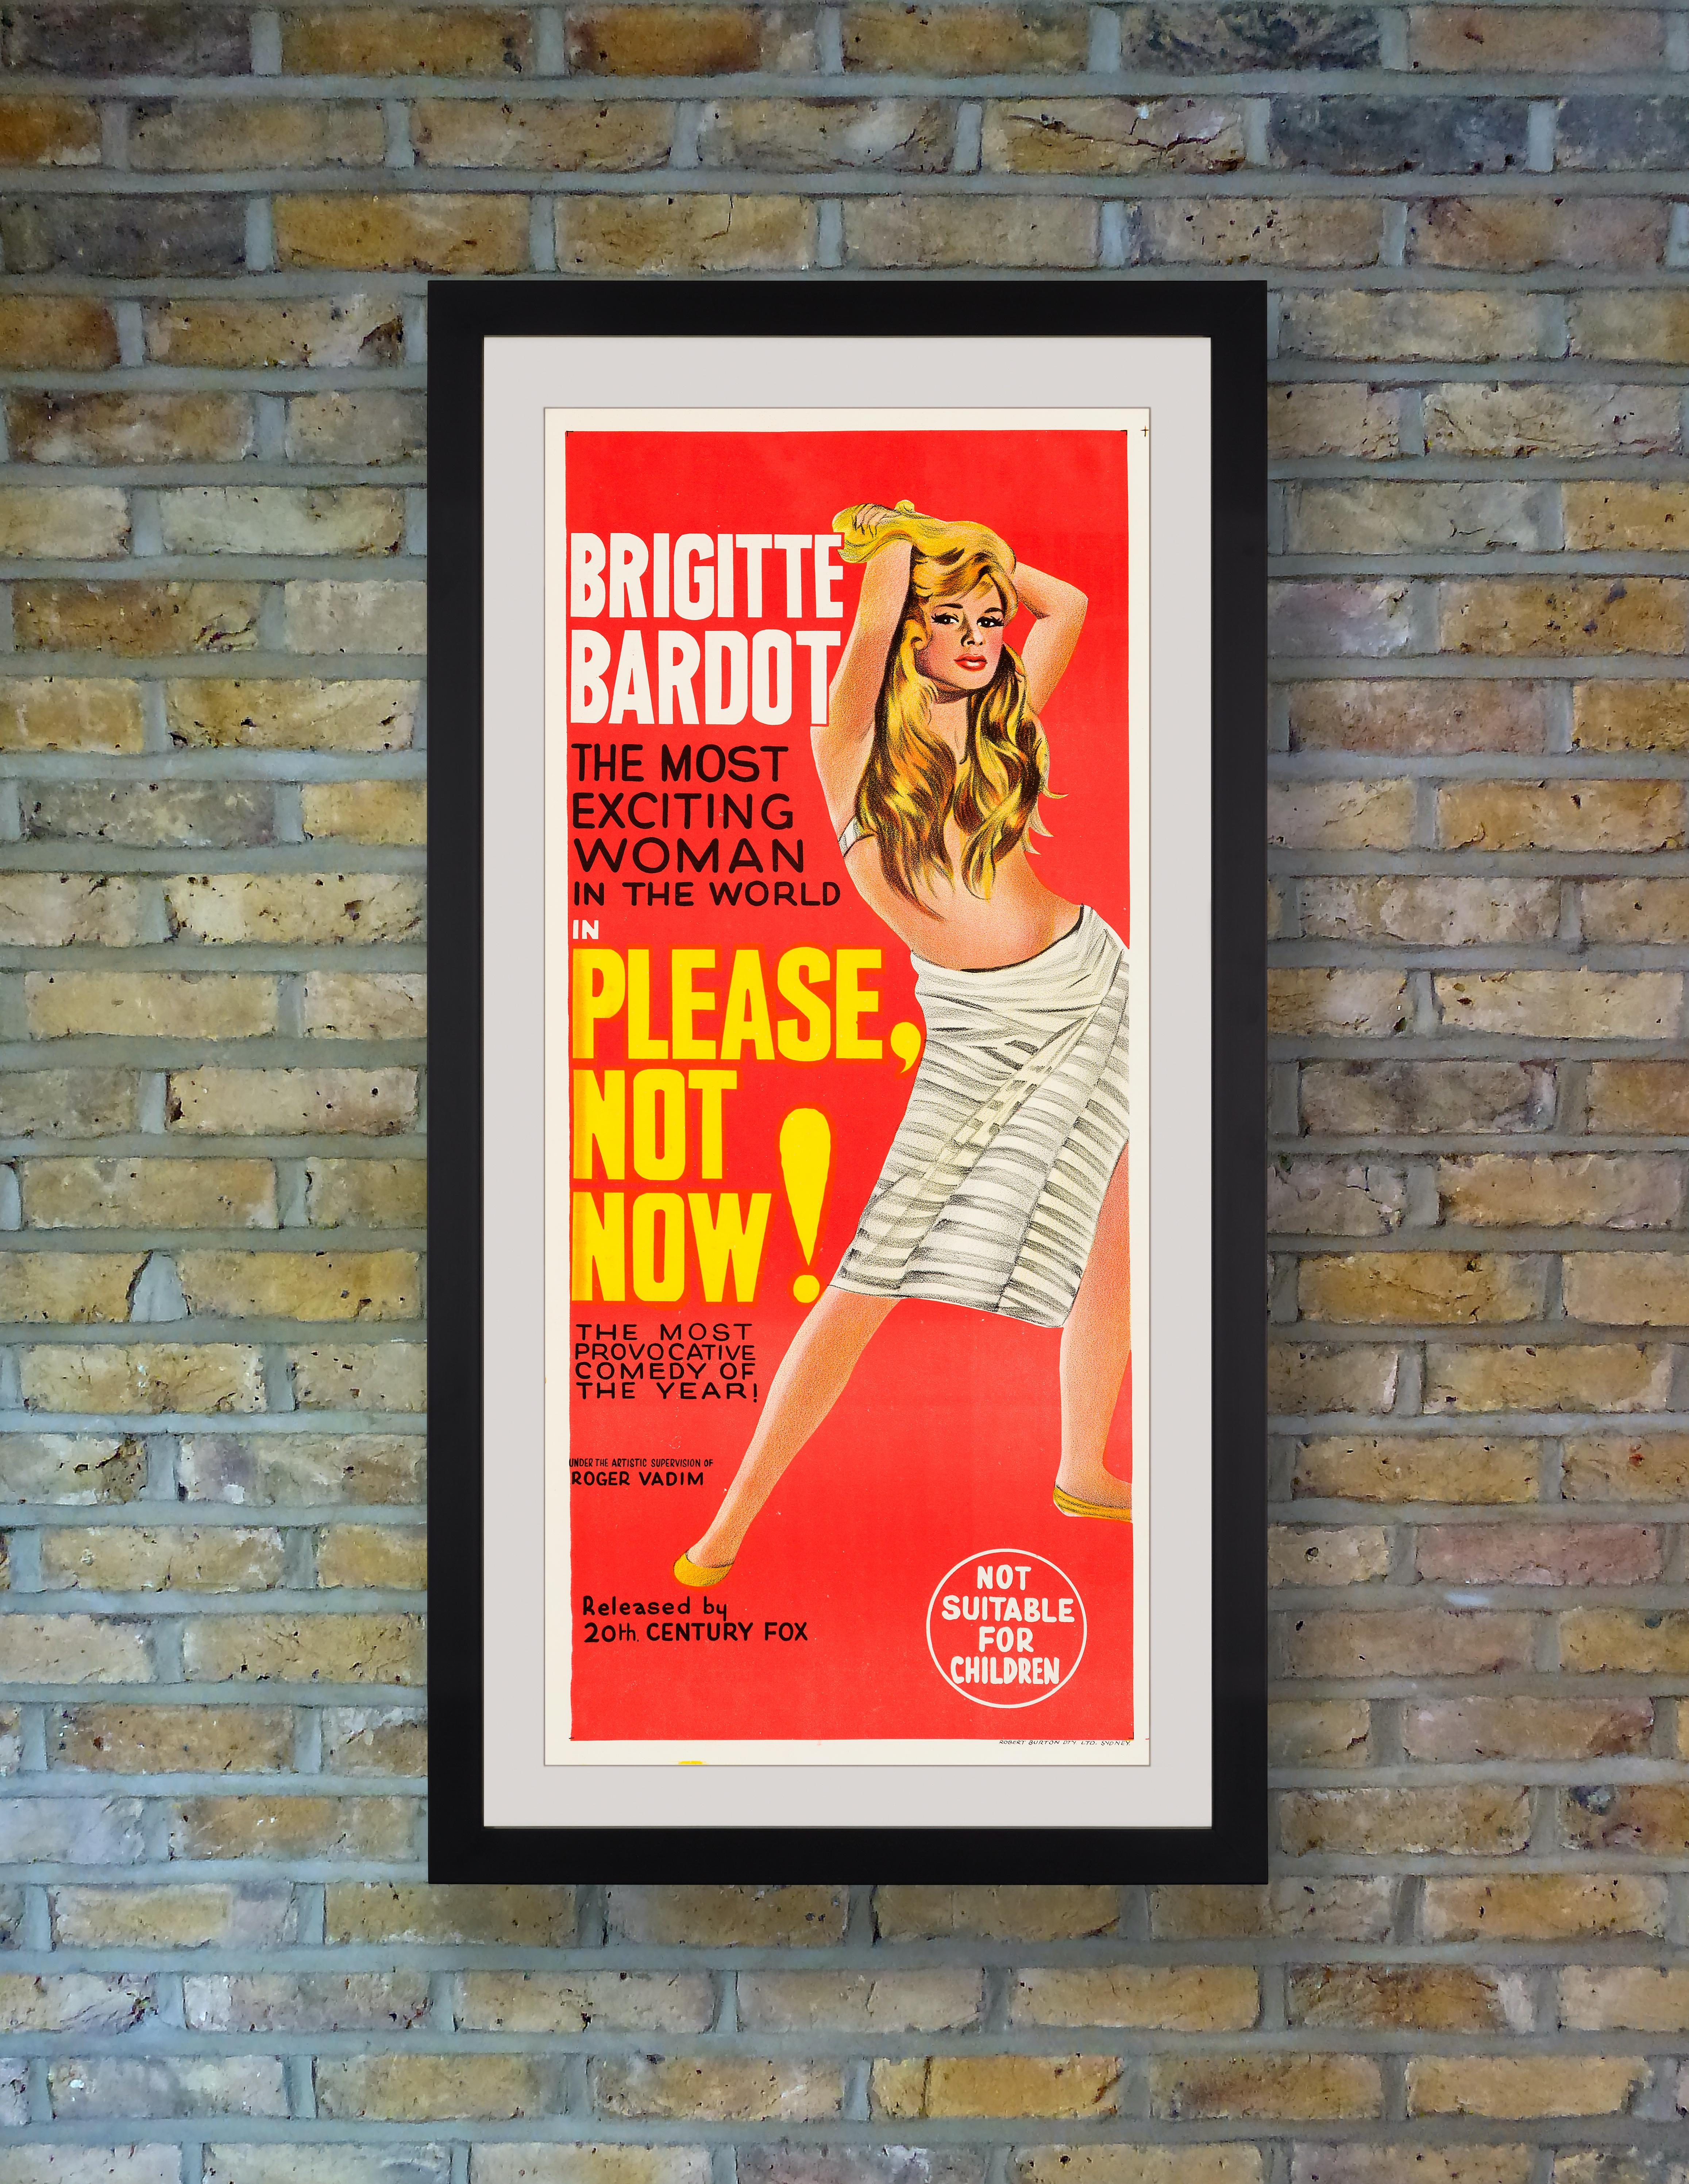 A sultry Brigitte Bardot sizzles on this striking stone lithography poster for the French screwball rom-com 'La Bride sur le cou,' released in Australia and the UK as 'Please, Not Now!' and in the US as 'Only For Love'. Bardot starred as the saucy